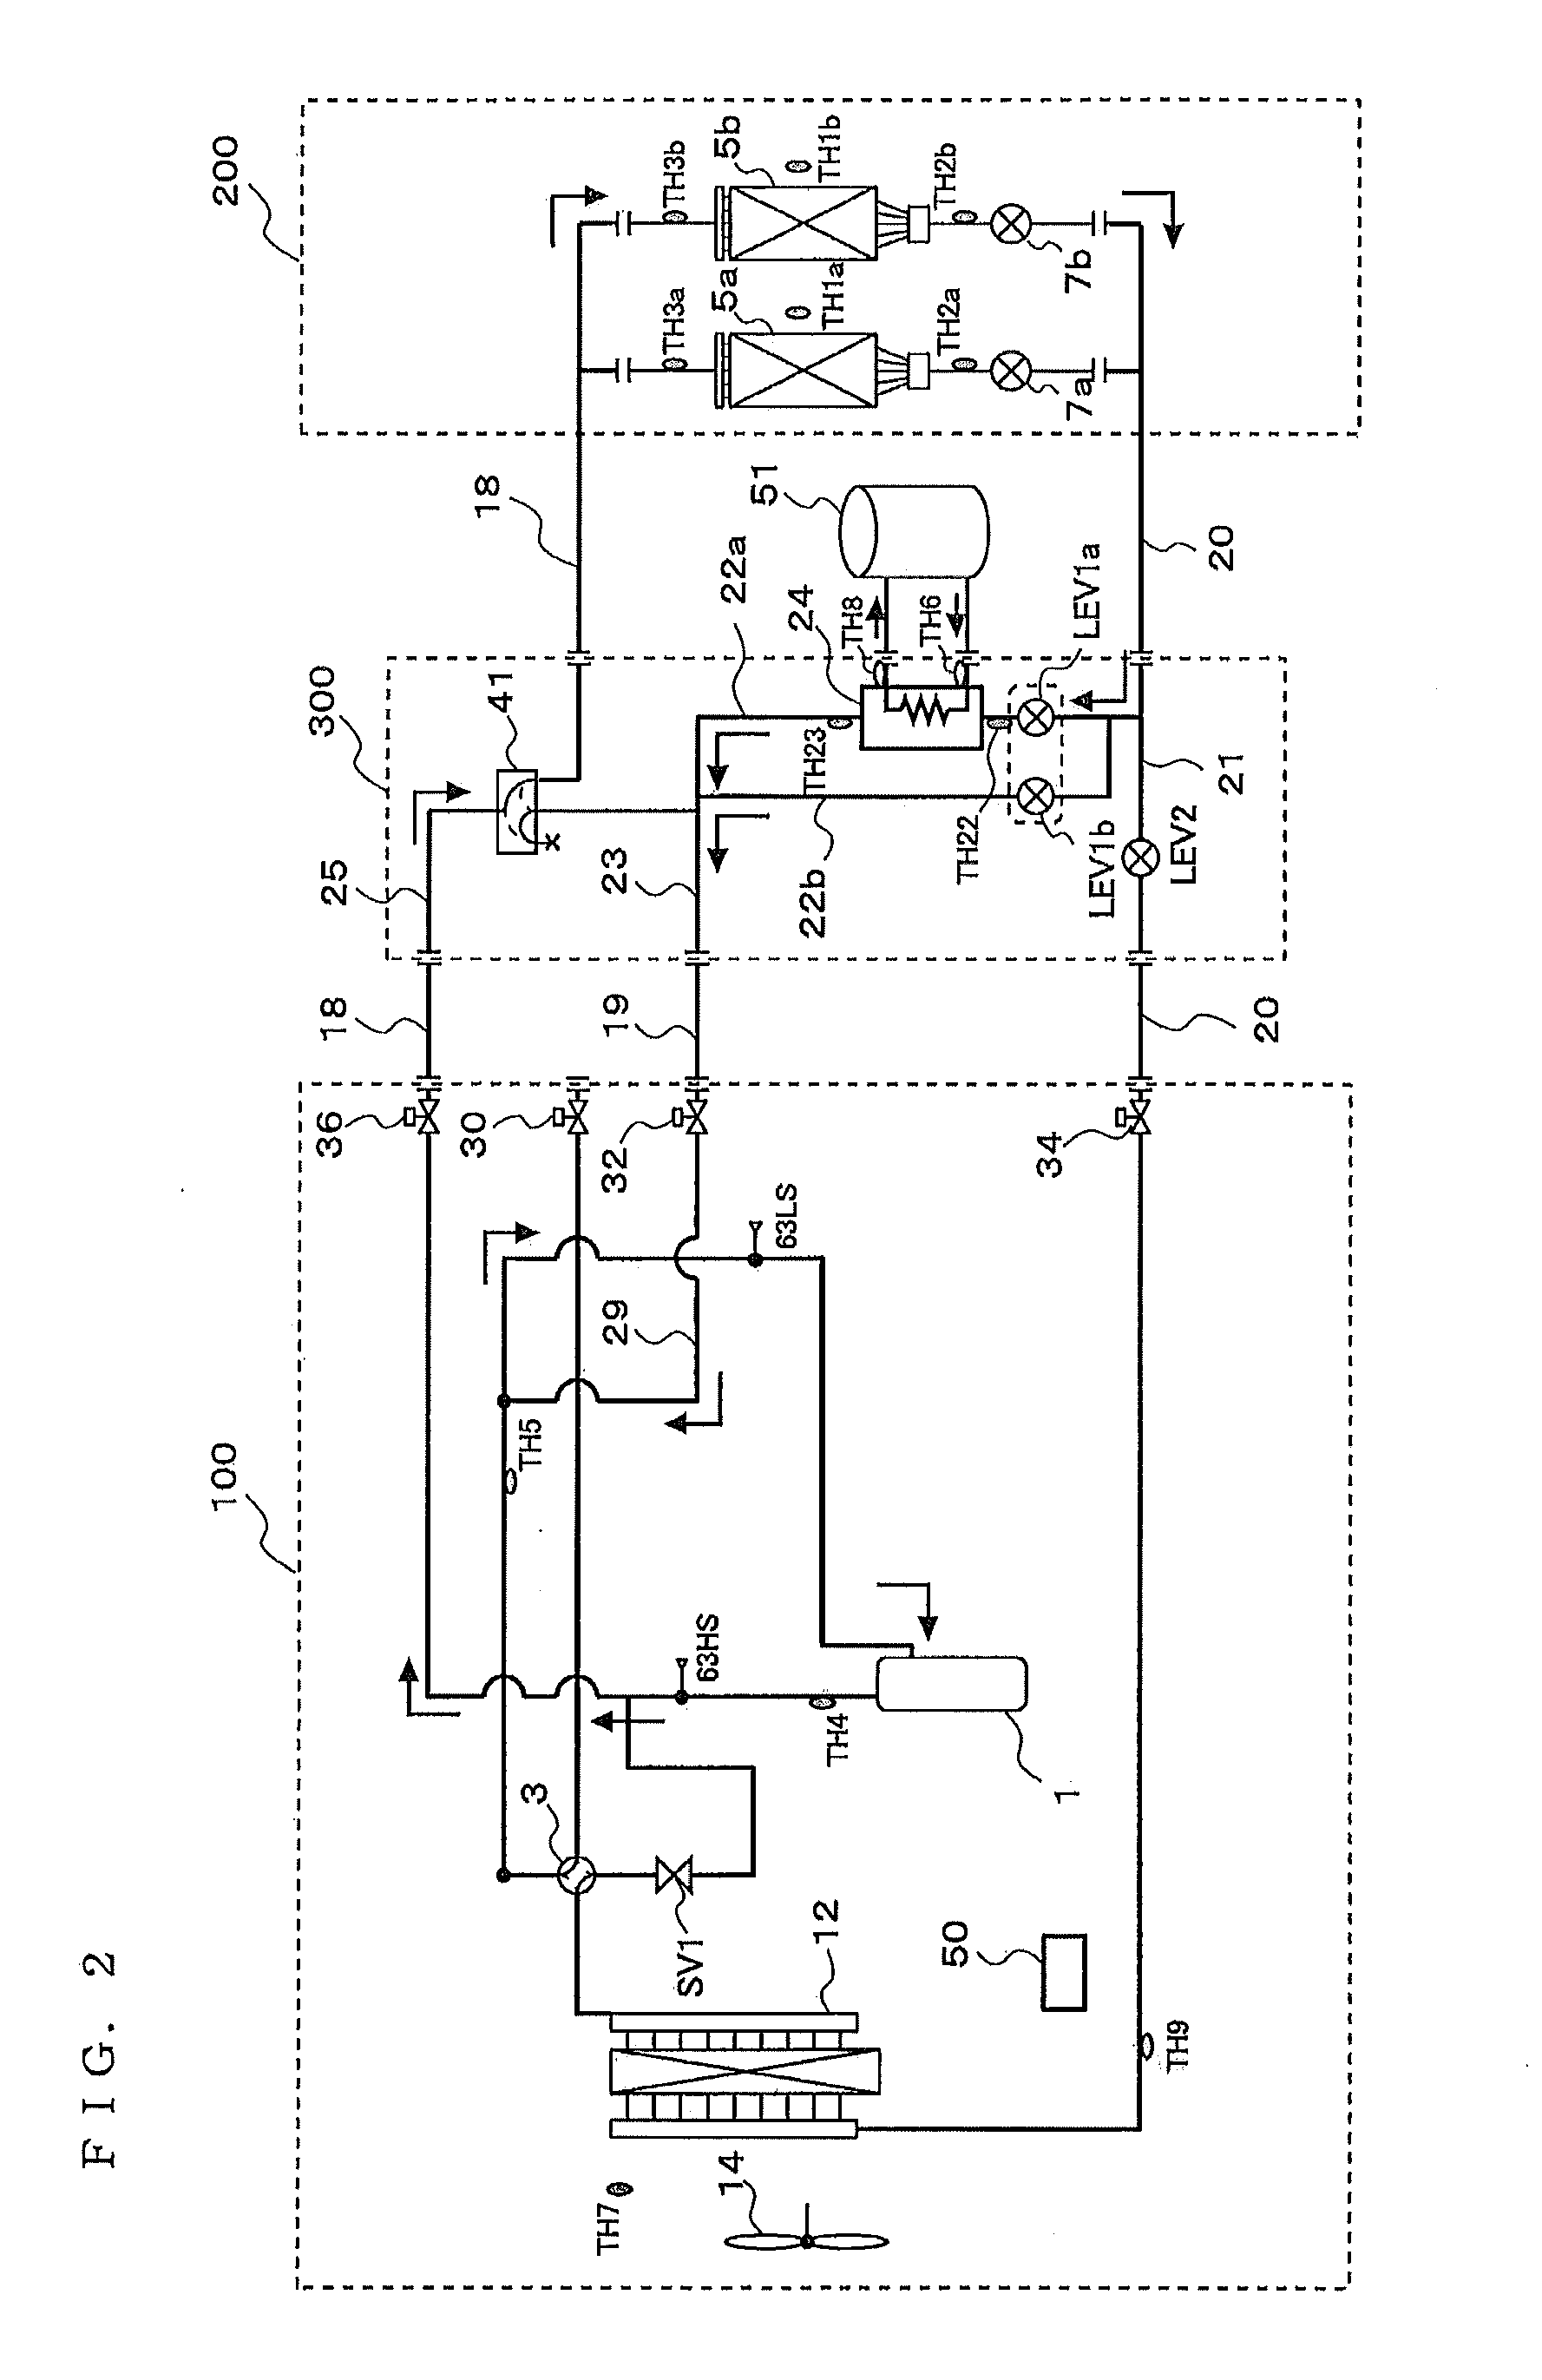 Air-conditioning apparatus including unit for increasing heating capacity